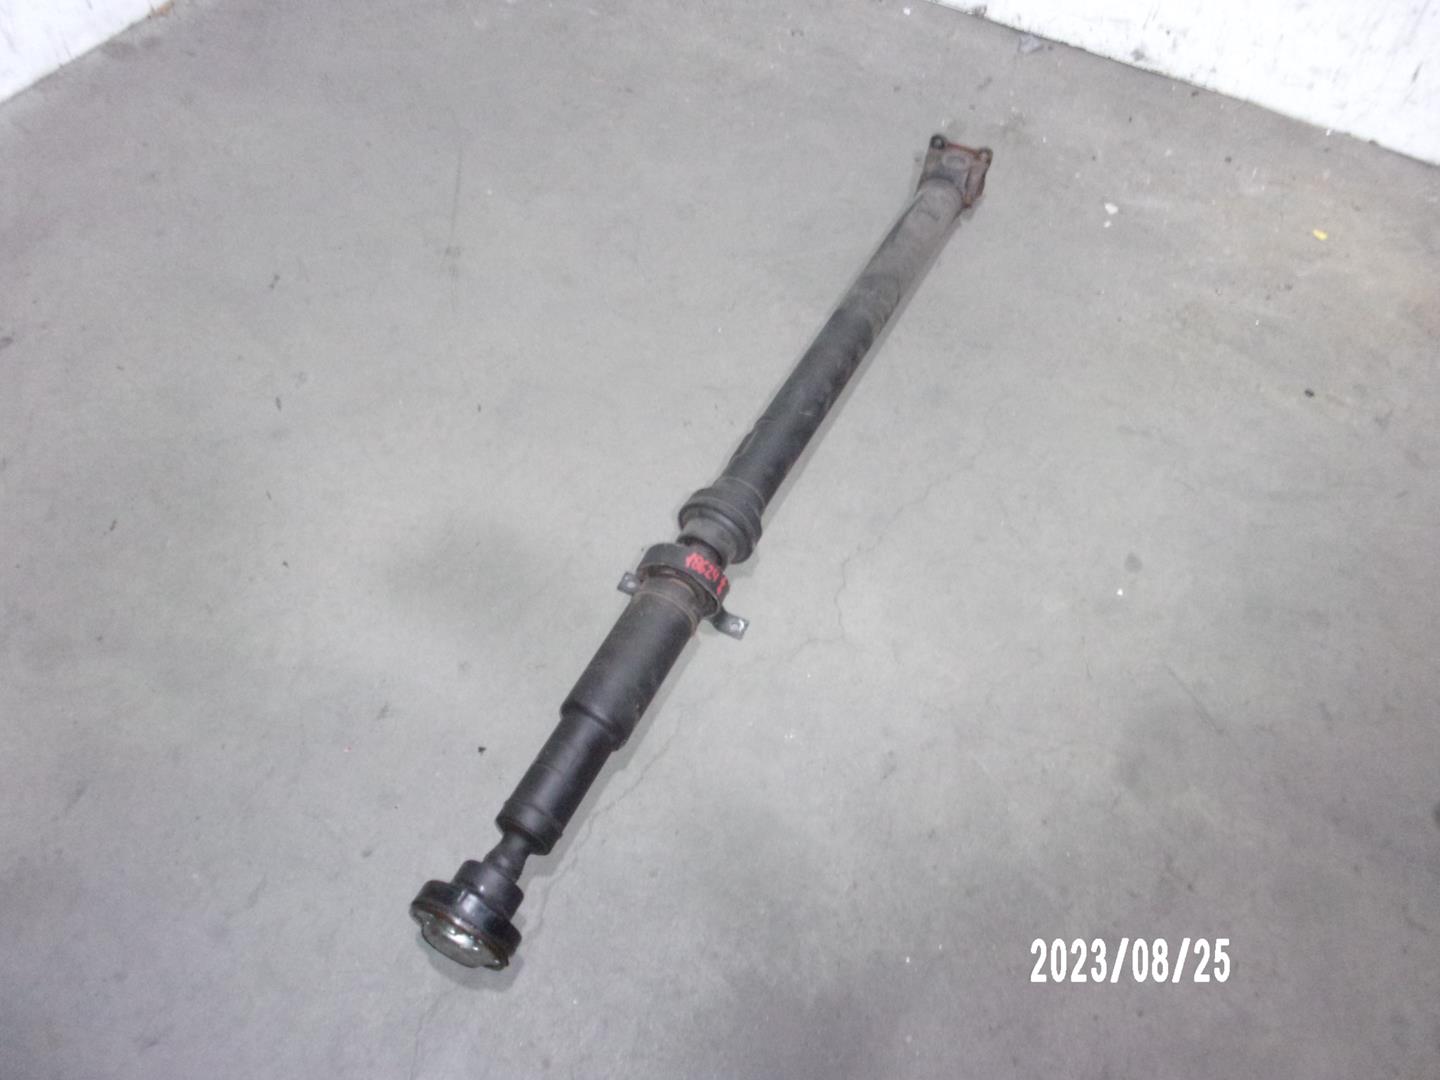 LAND ROVER Discovery 4 generation (2009-2016) Gearbox Short Propshaft TVB500360, TRASERA, BURRA3B 21119681